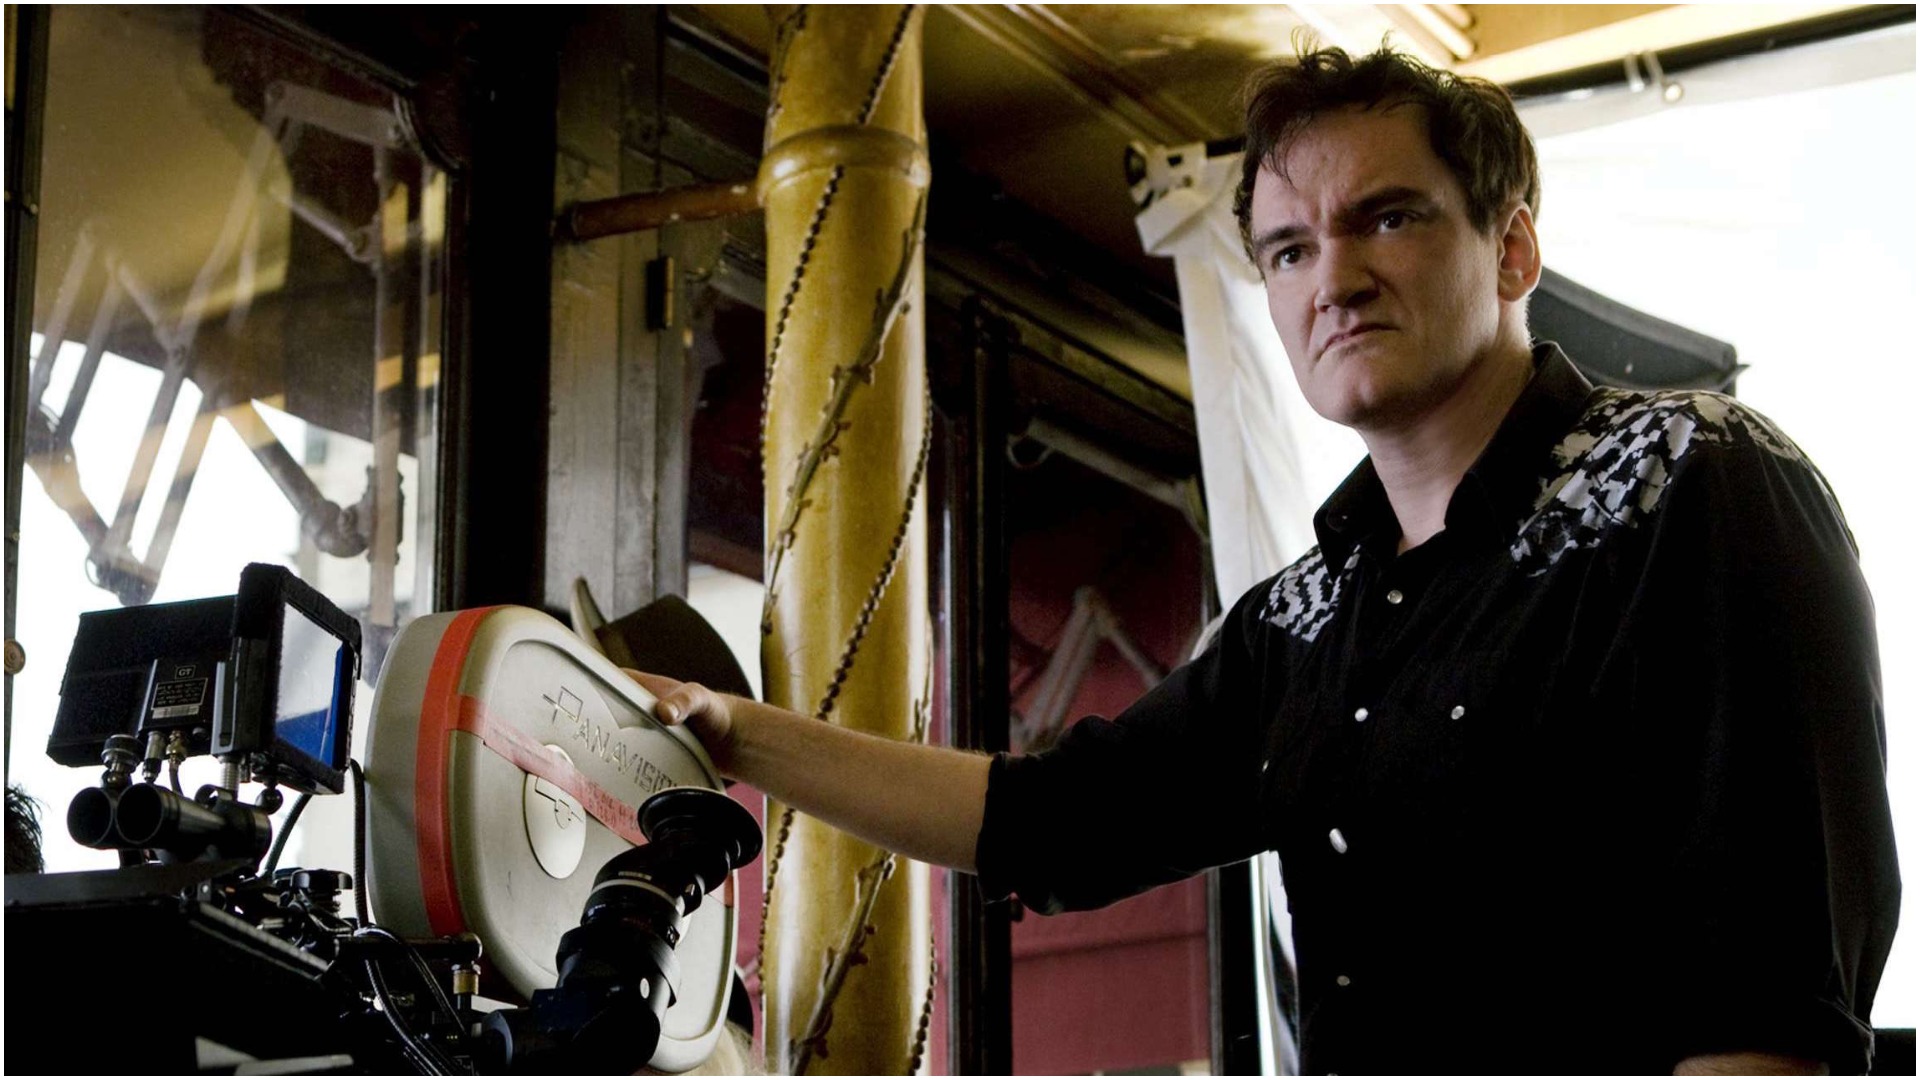 Quentin Tarantino has set his next project – a book on film history